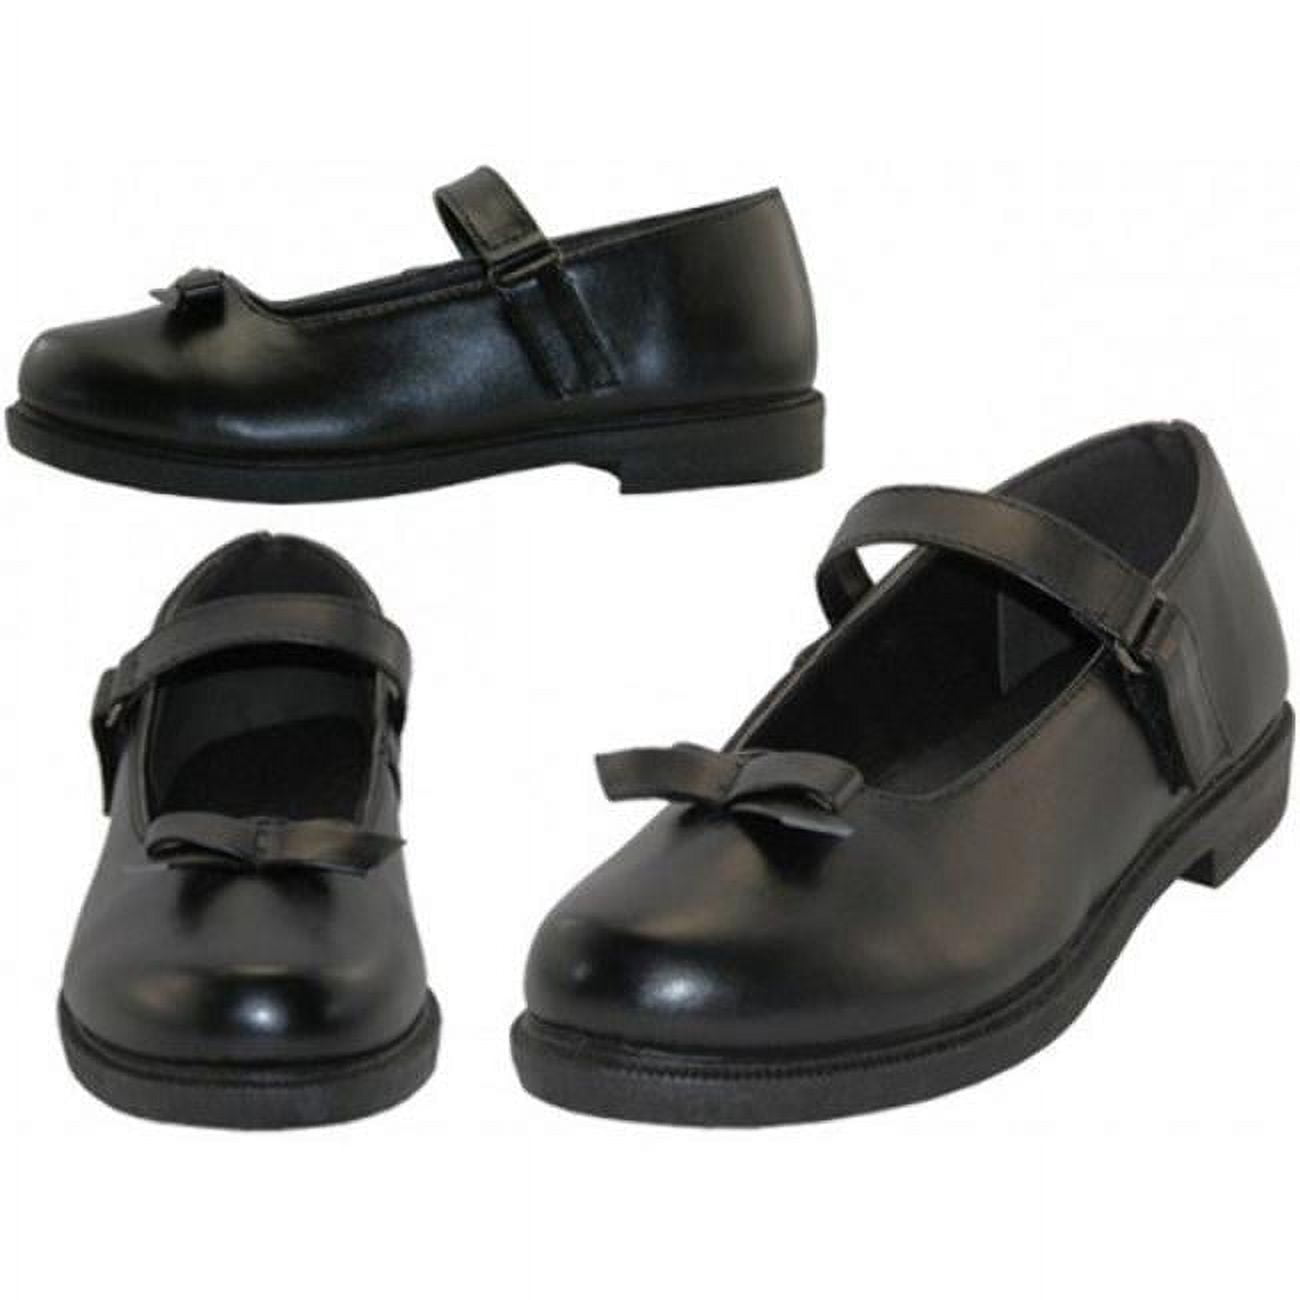 Picture of DDI 2327163 Girls&apos; Mary Jane with Bow on Top Black Shoes - Size: 11-3 Case of 24